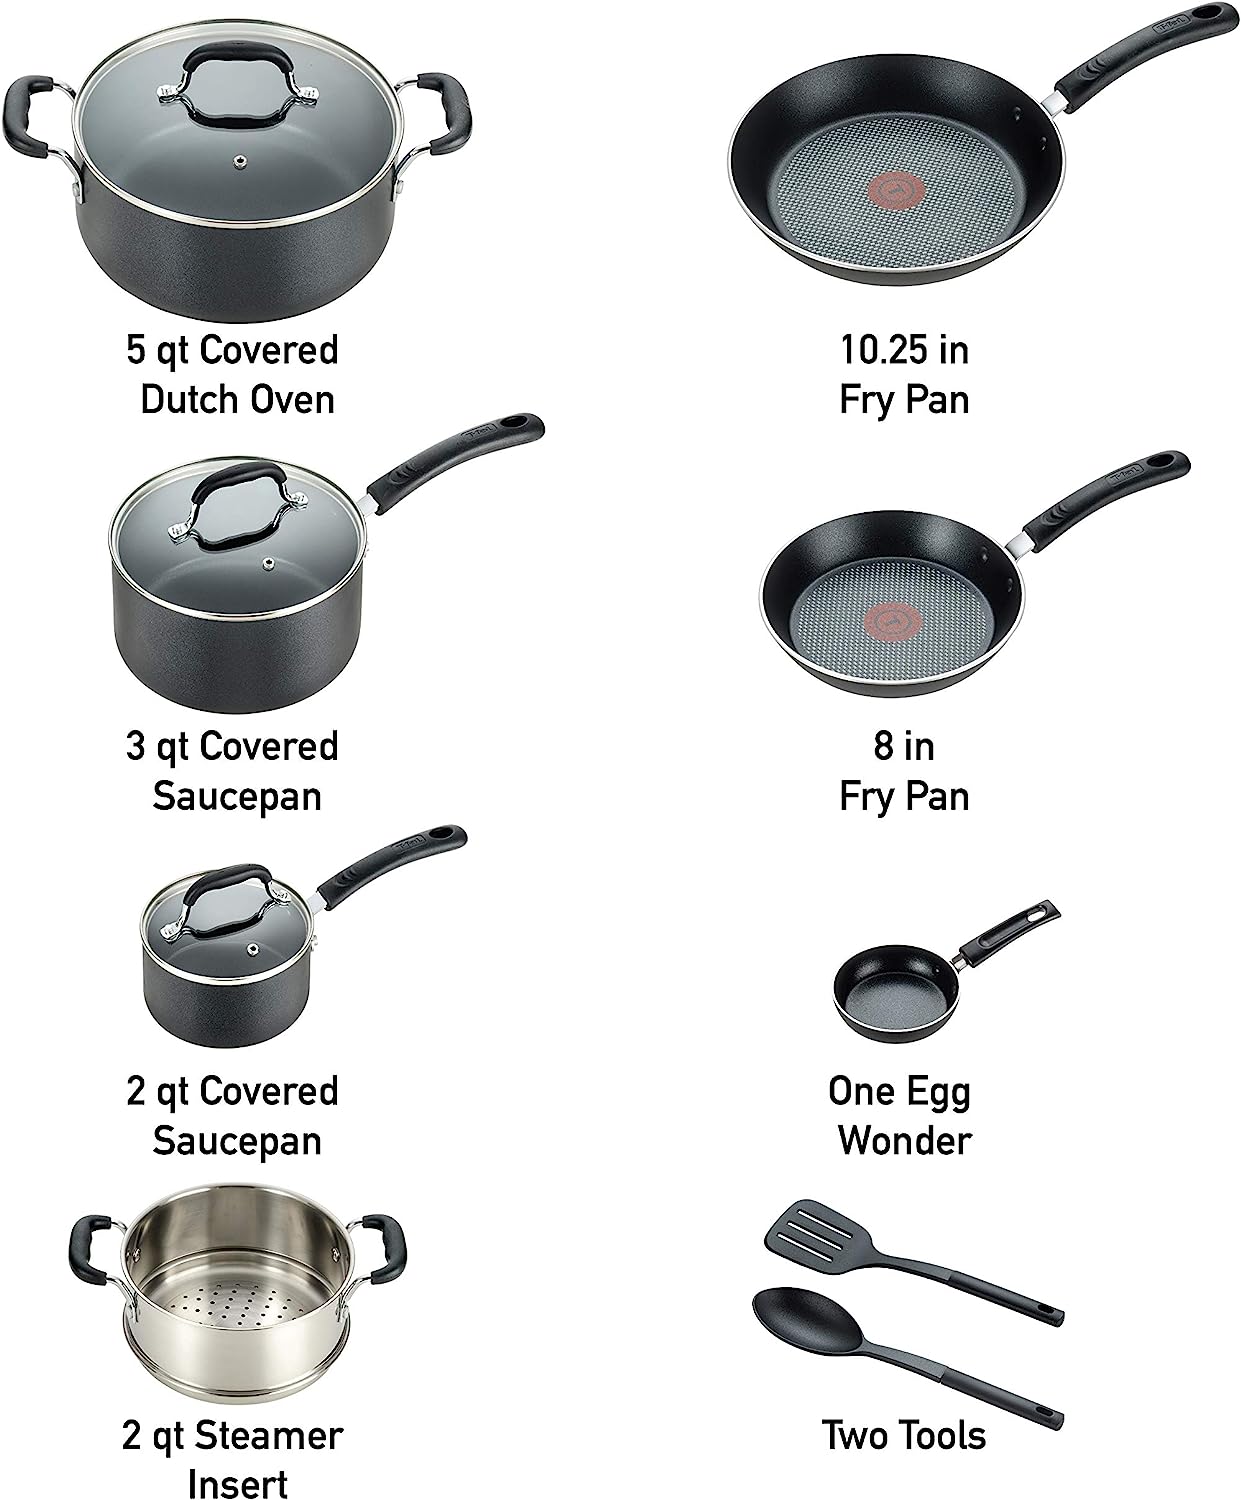 T-fal Experience Nonstick 3 Piece Fry Pan Set 8, 10.25, 12 Inch